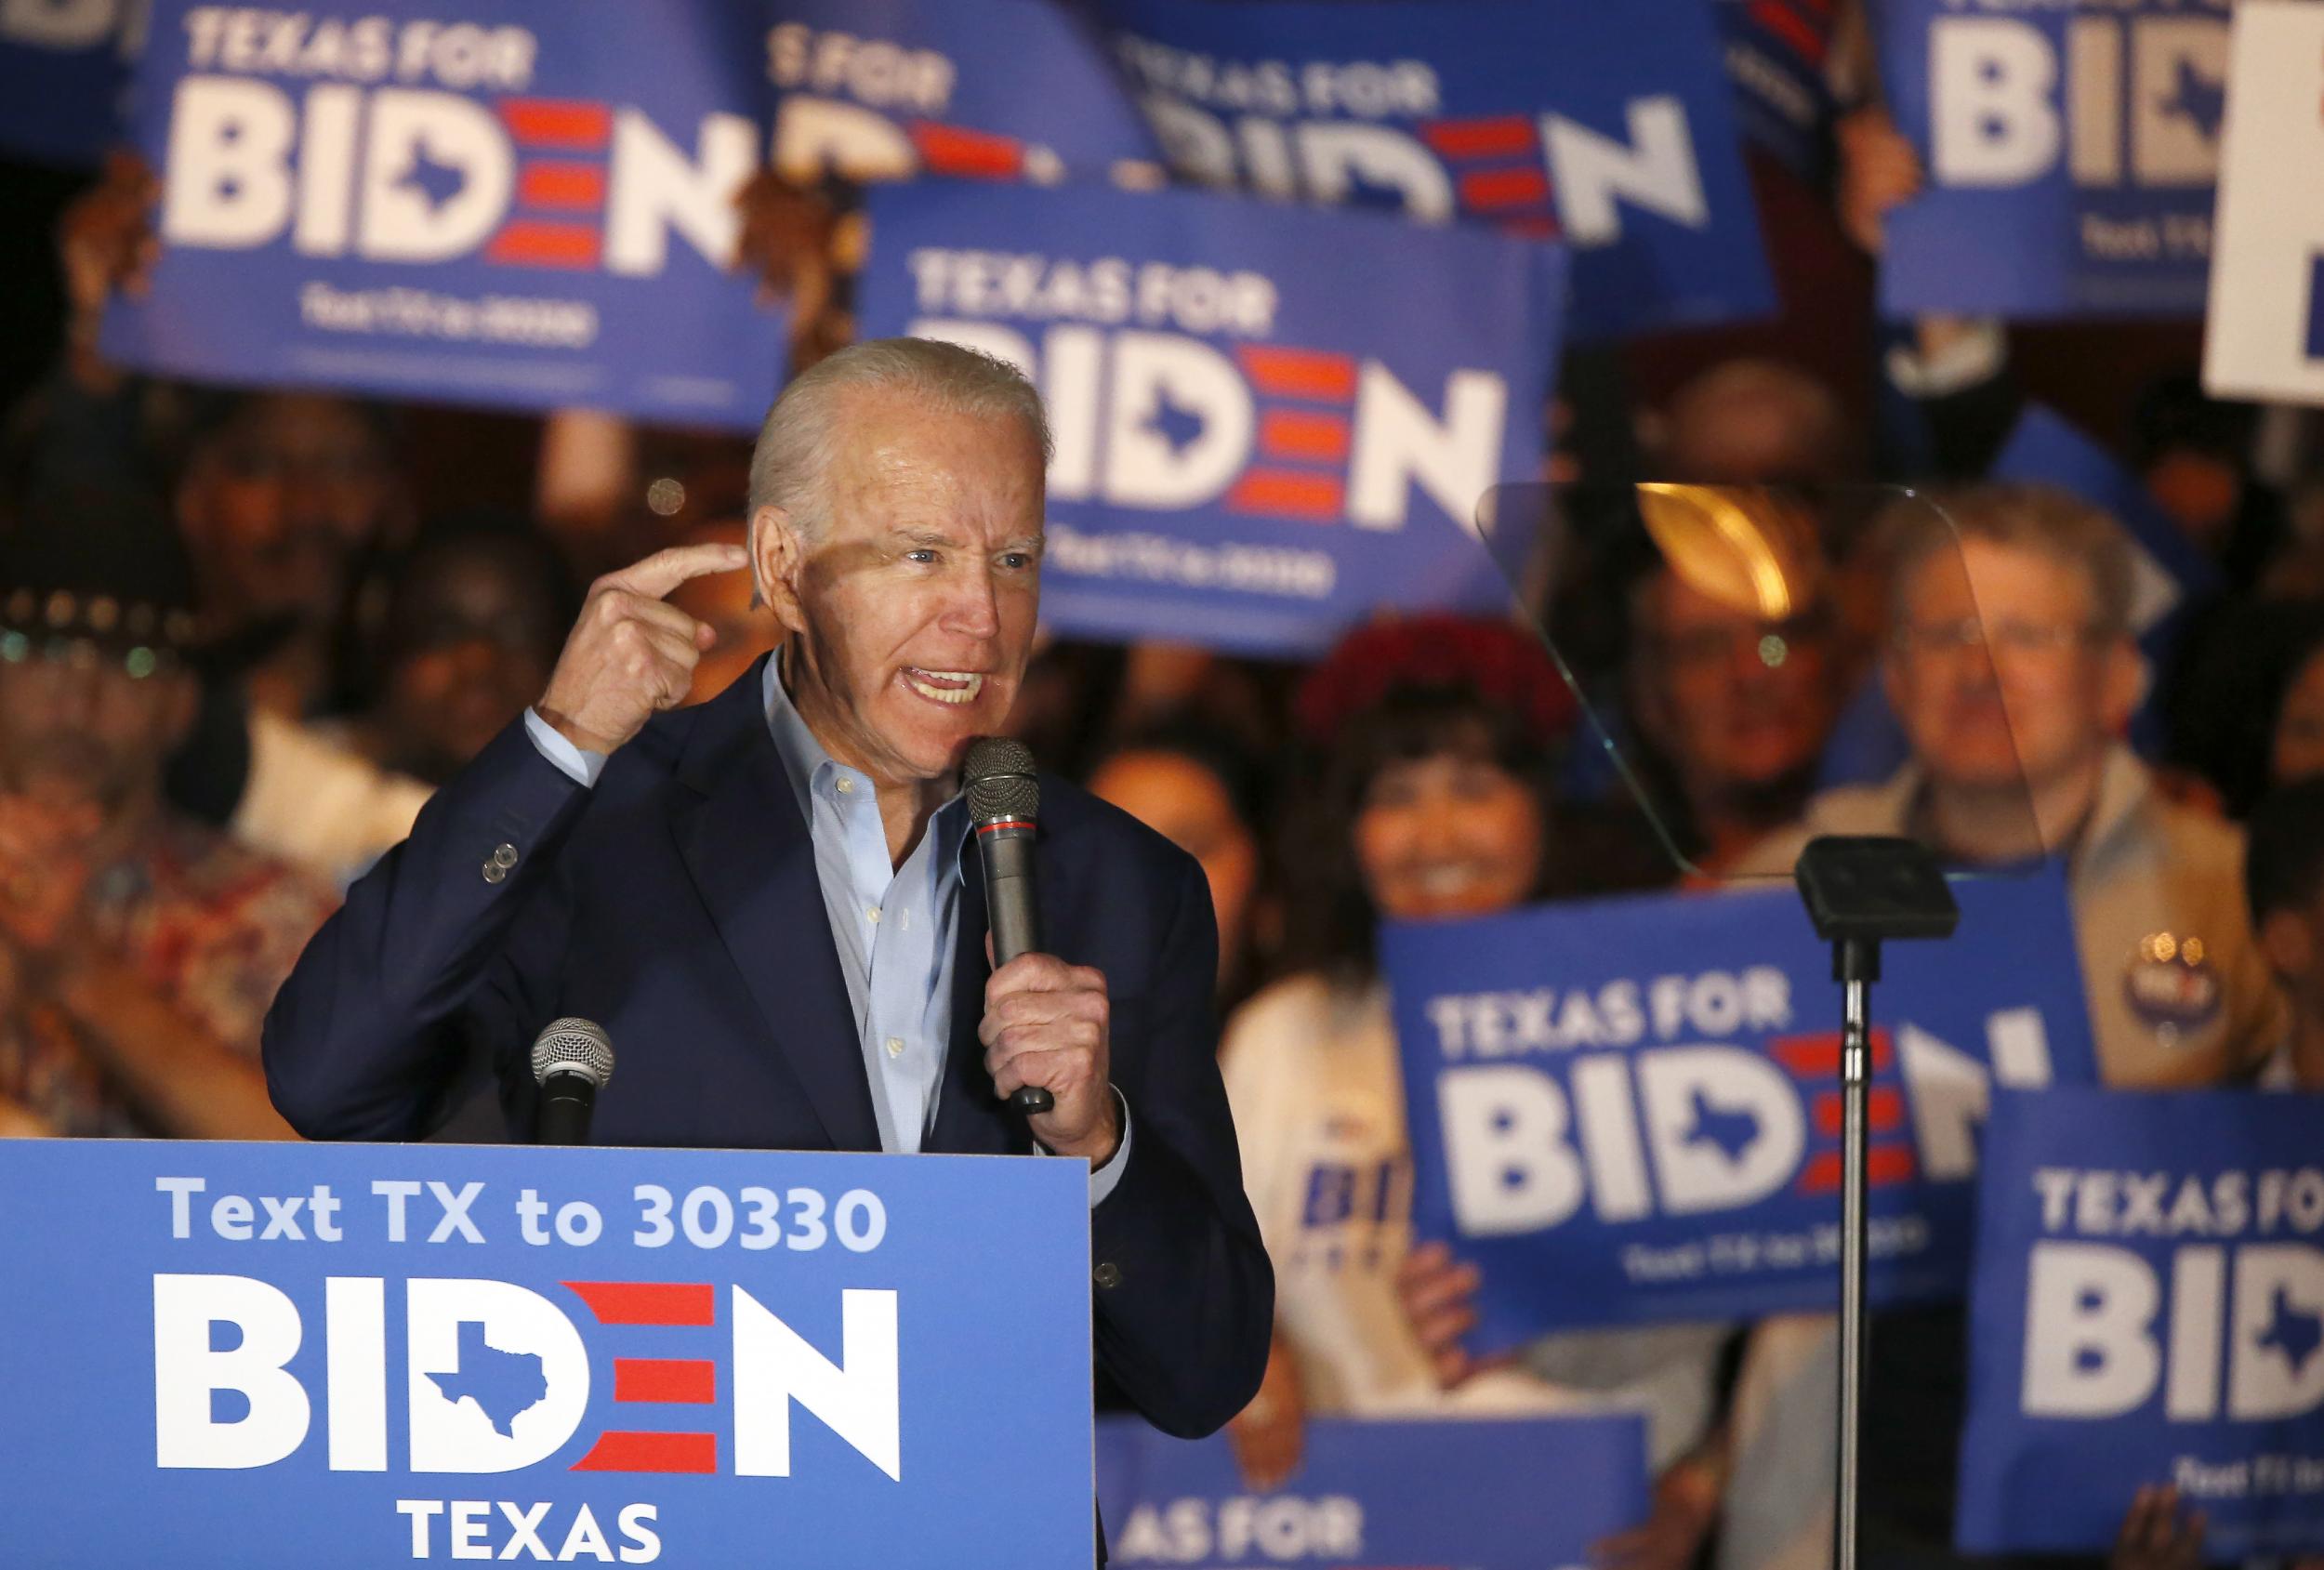 Trump trailing Biden in new Texas poll as president loses support among college-educated voters